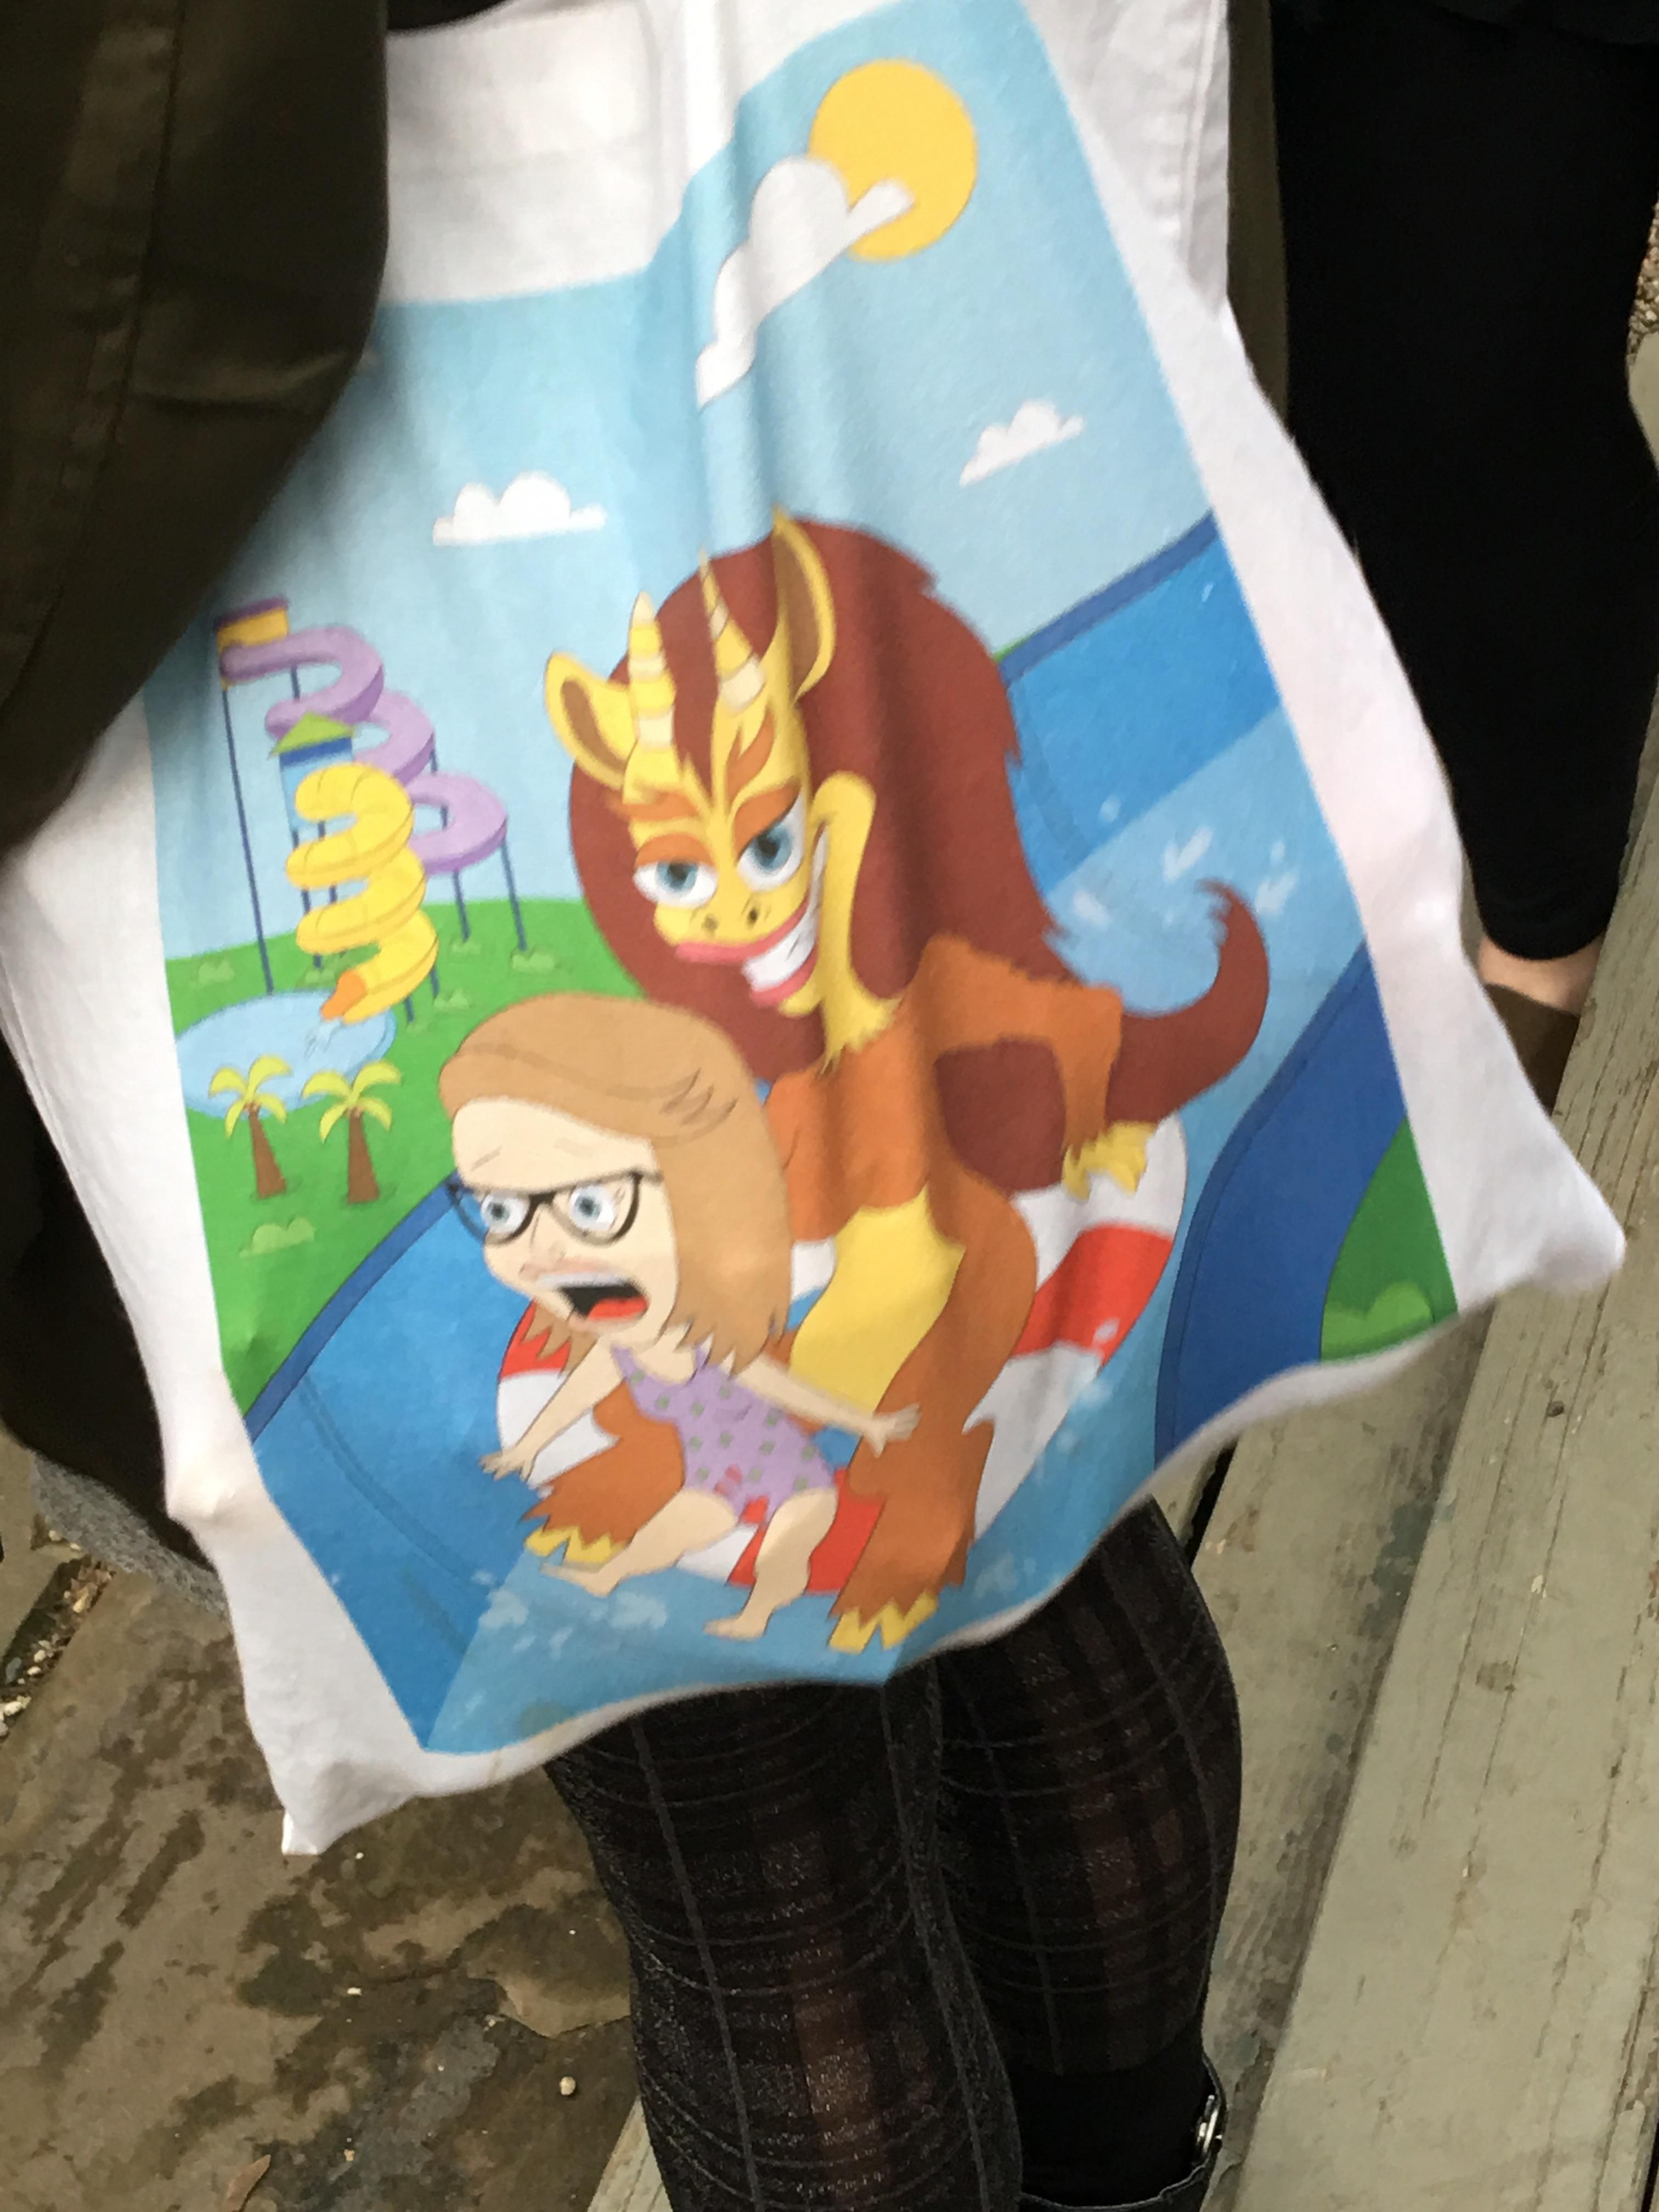 My friend had her first period at a water park, and her German friend made her bag